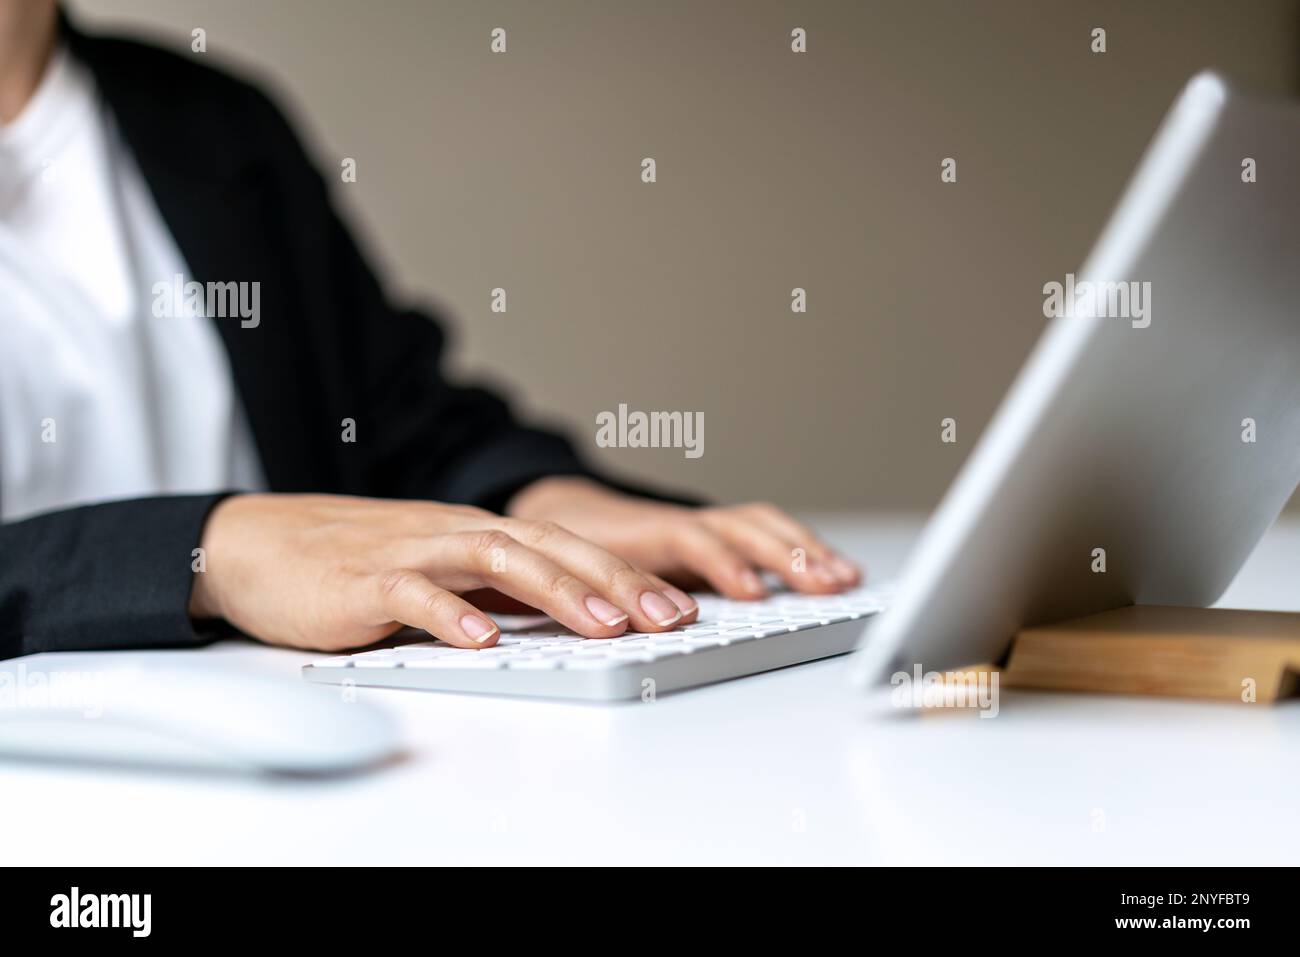 Female business person using wireless keyboard and digital tablet. Stock Photo